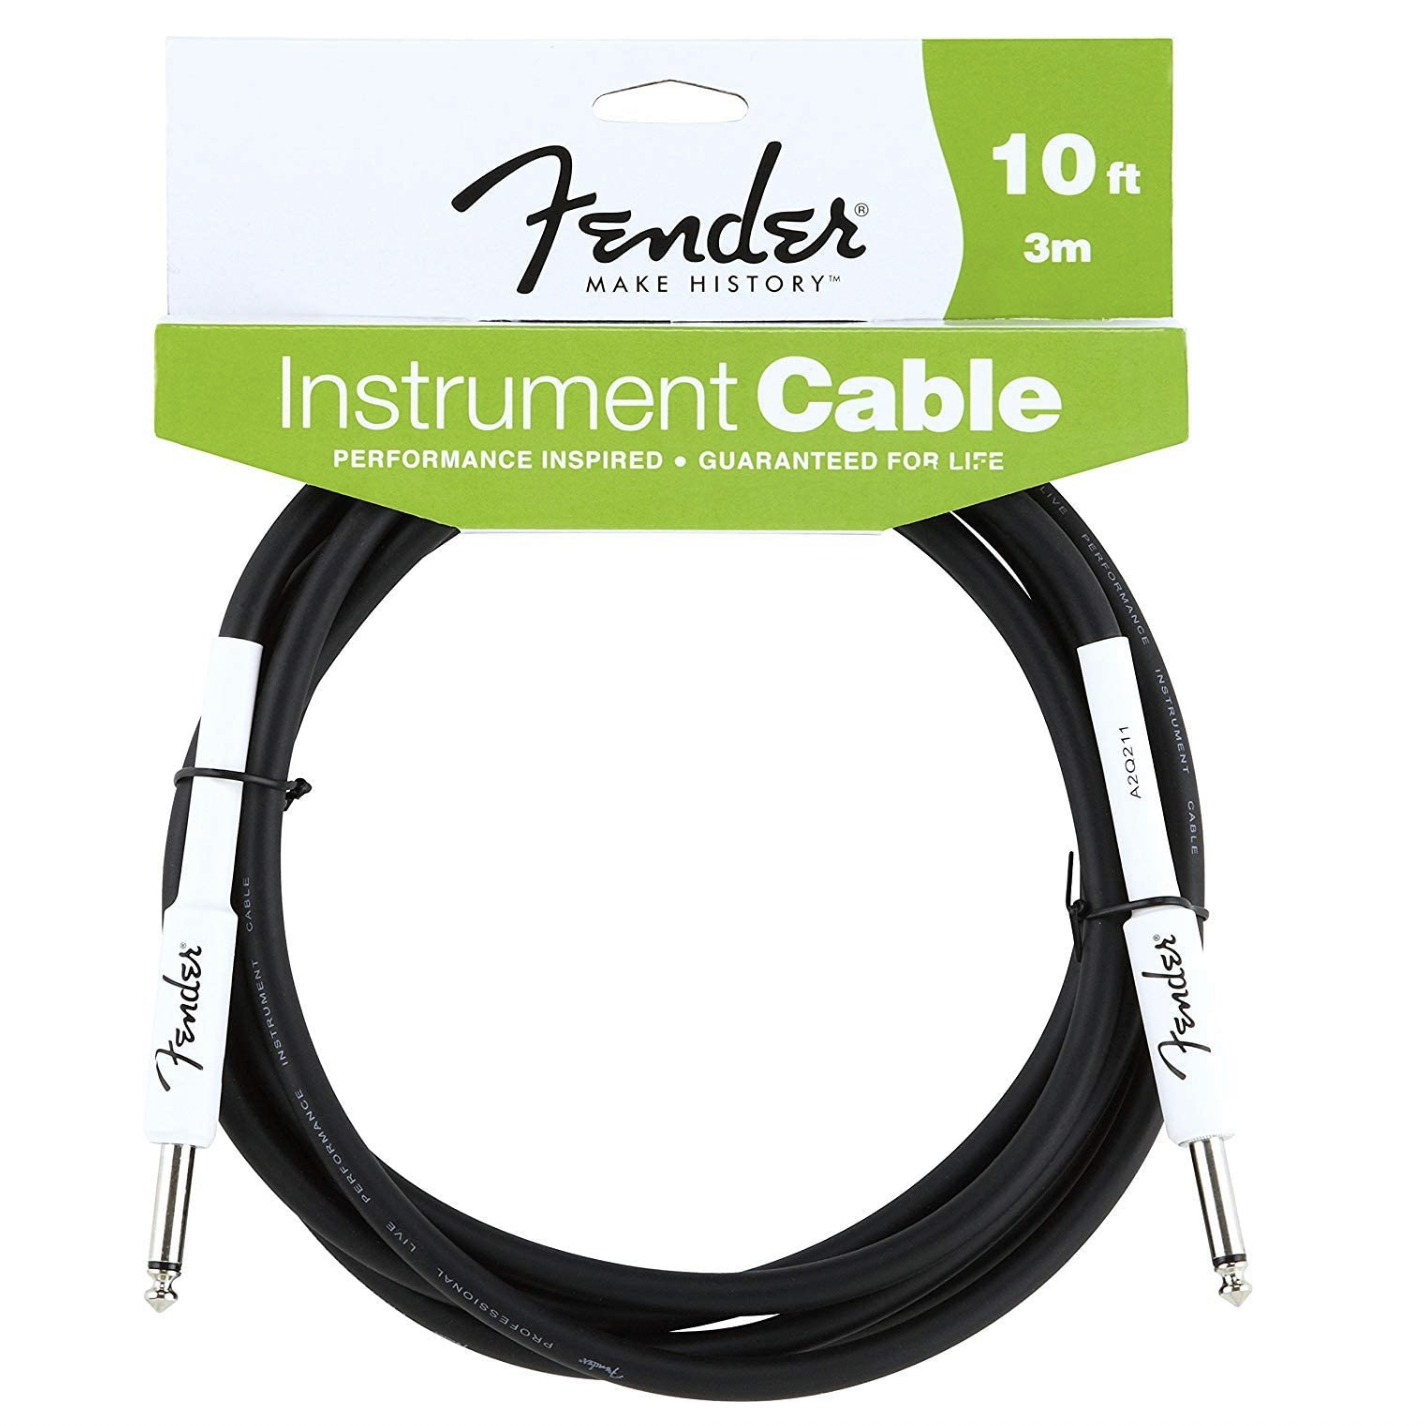 Fender instrument cable.